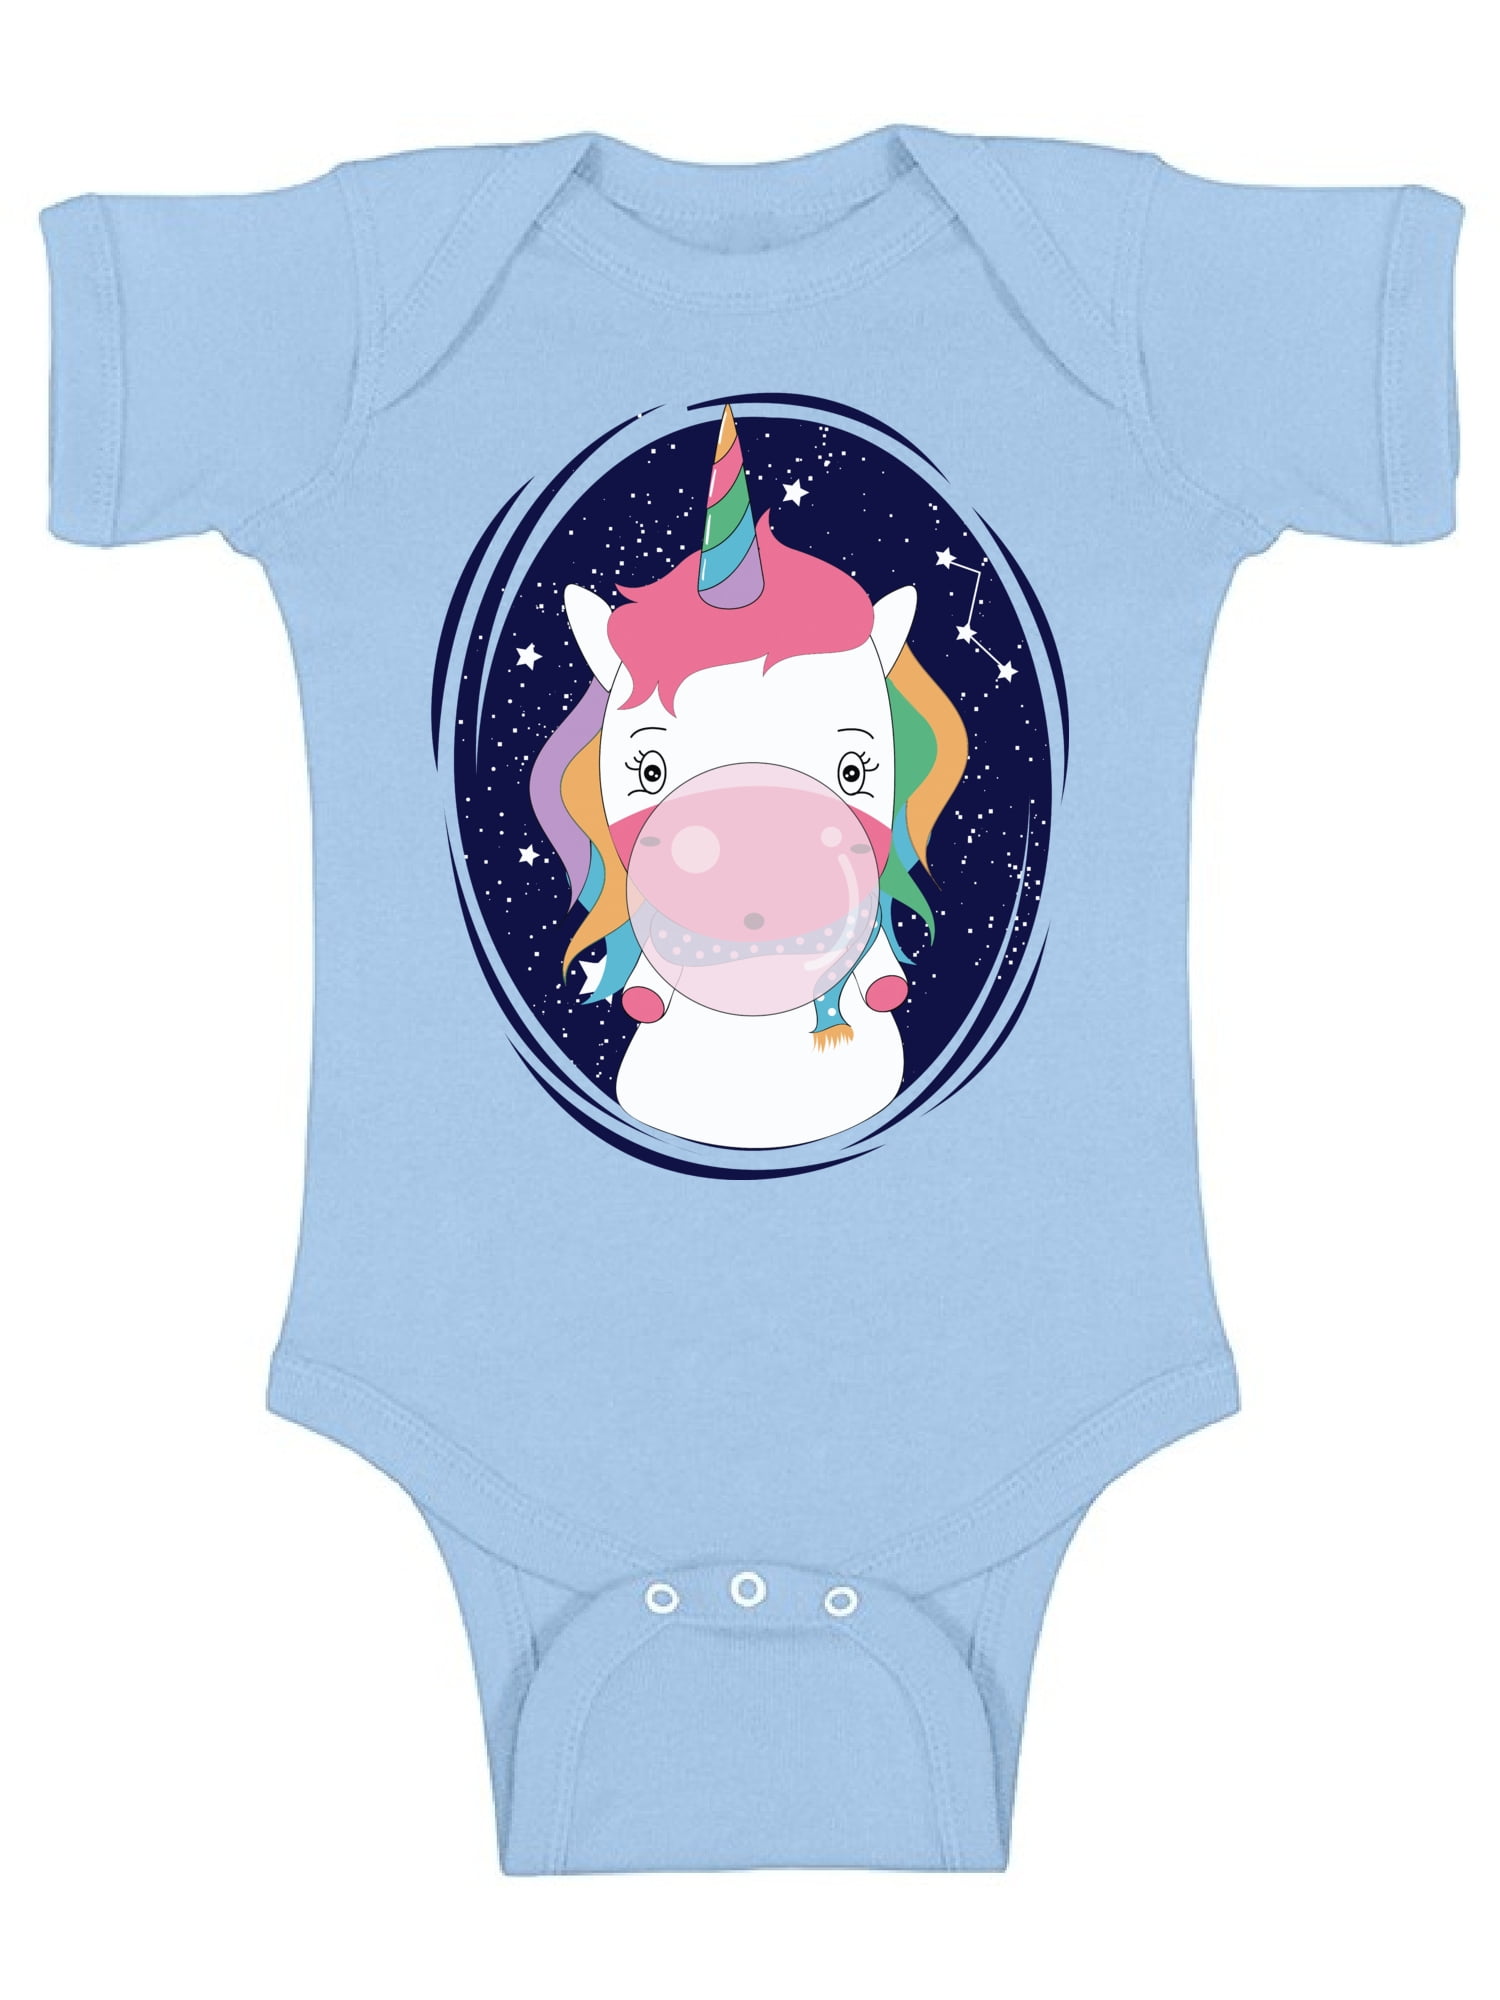 I'm A Unicorn Blue or Pink Soft Cotton Bodysuit New Baby Shower Present Gift 